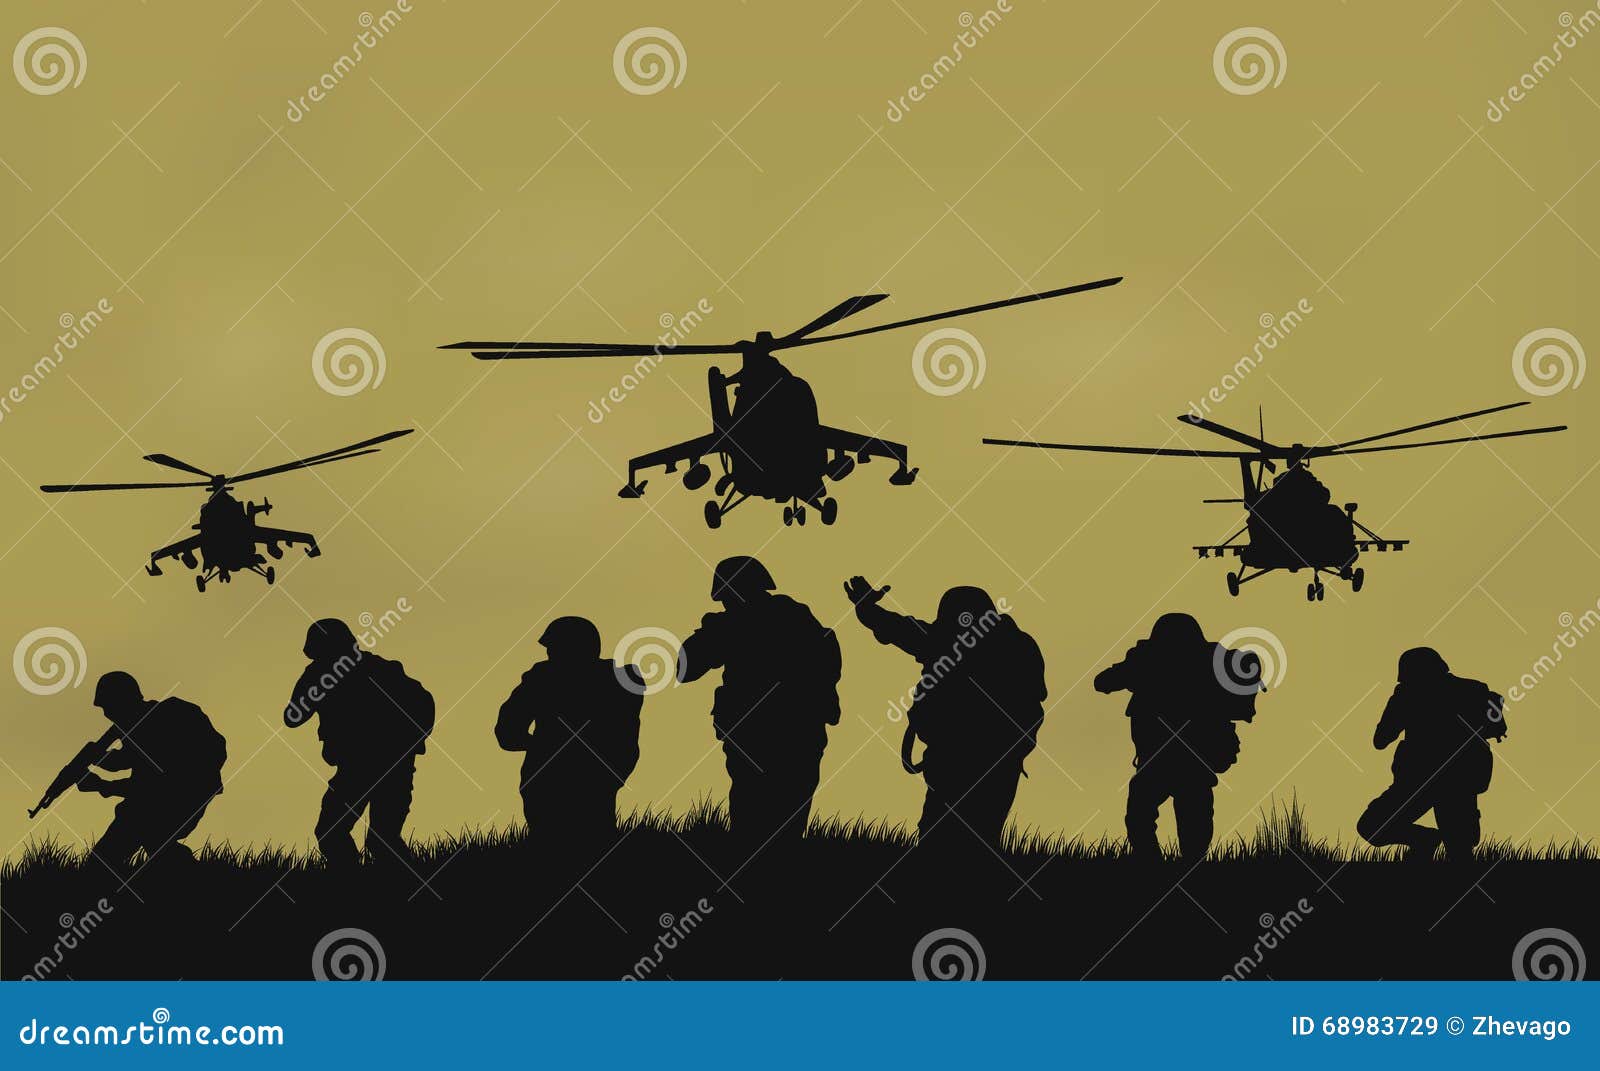 the soldiers going to attack and helicopters.